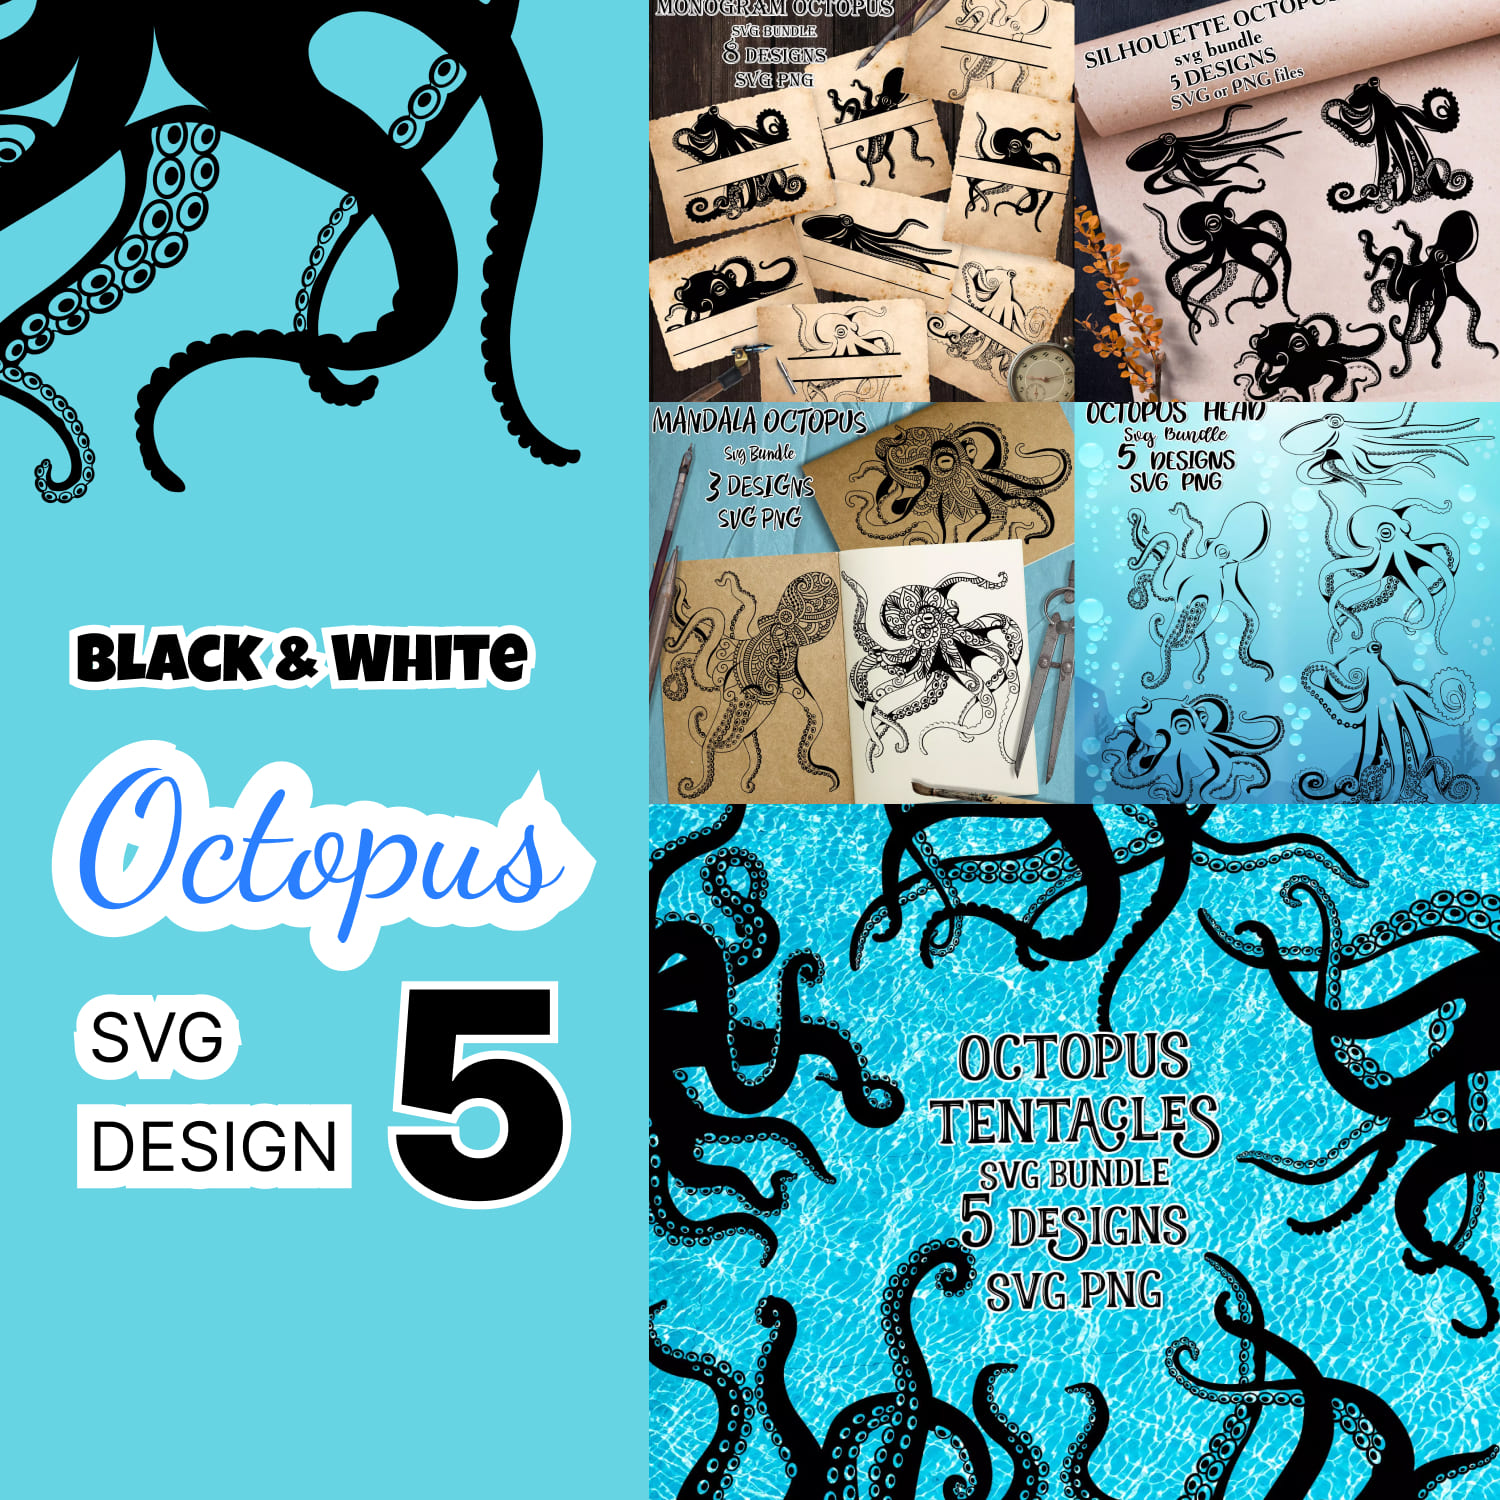 Collage of black and white octopus svg designs.